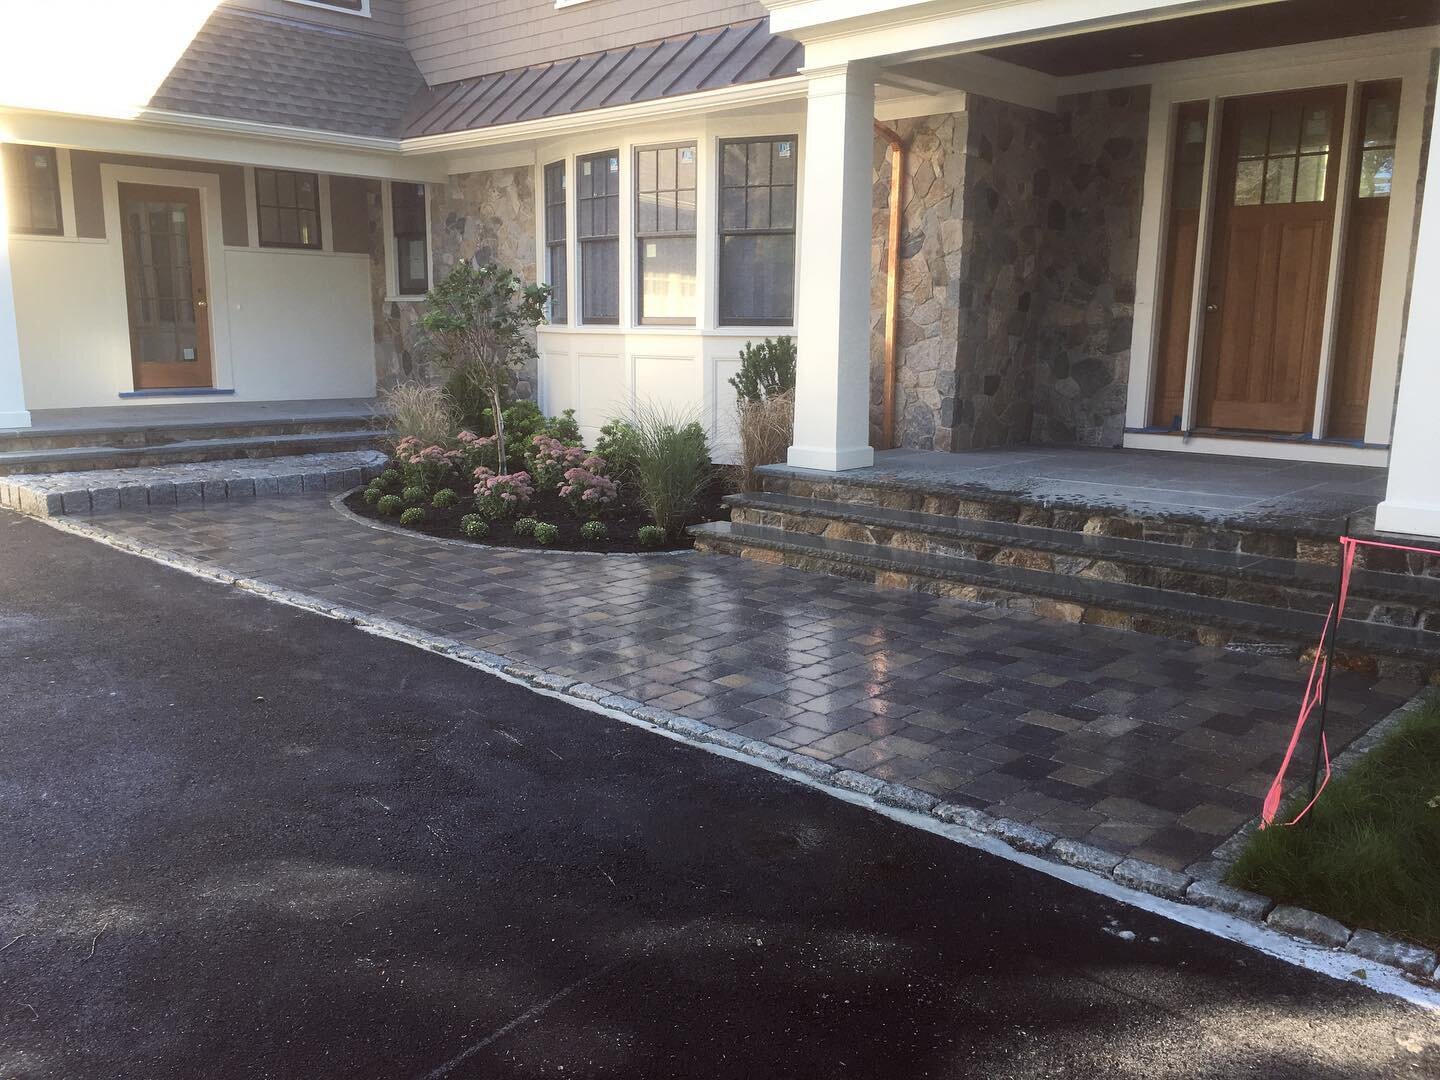 Looking to elevate your front entrance? Custom hardscape design is our specialty